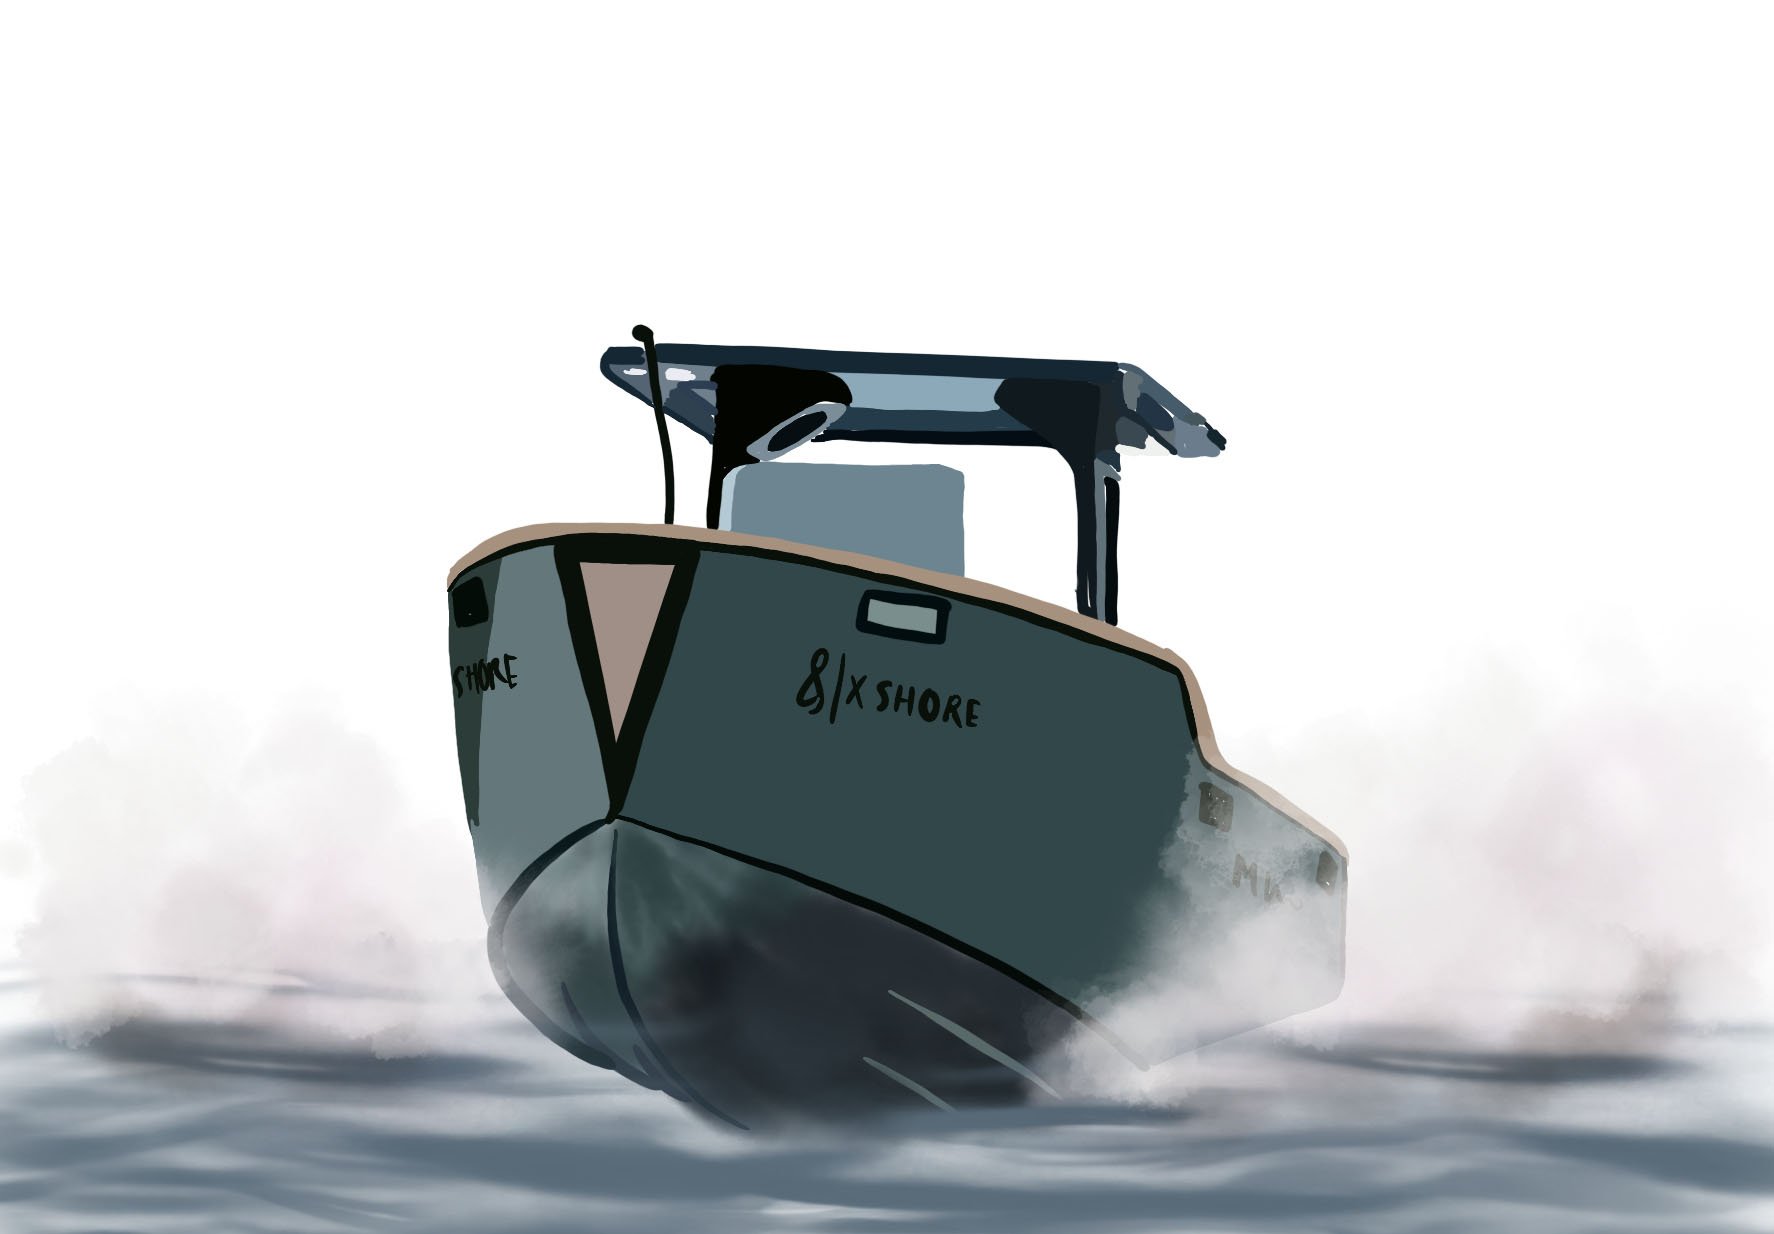 Electric boats rise in popularity for their new technology and sustainability mission